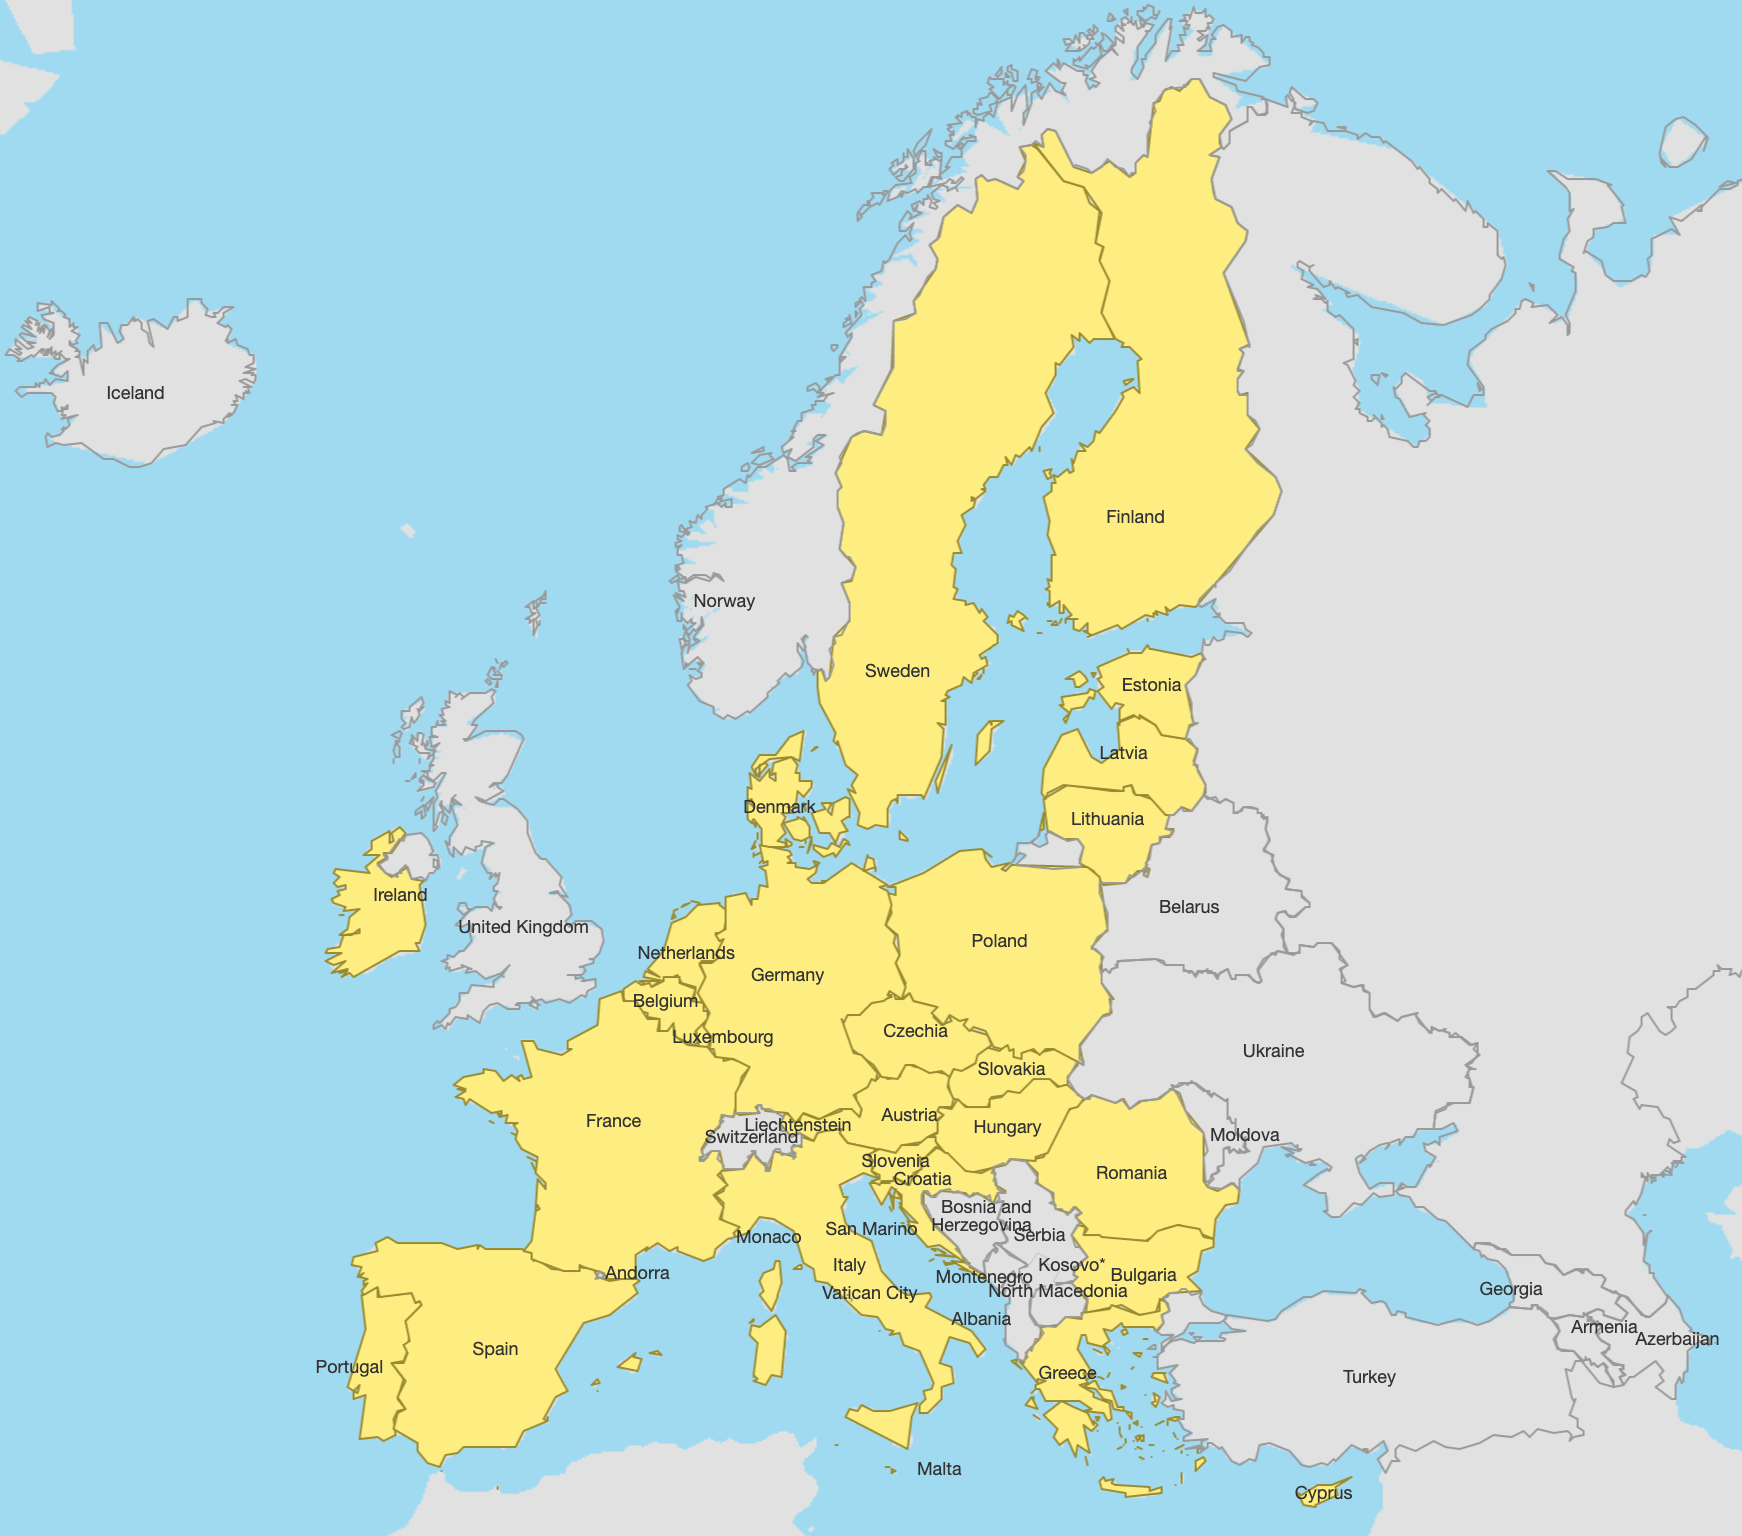 MAP of the countries in the EU